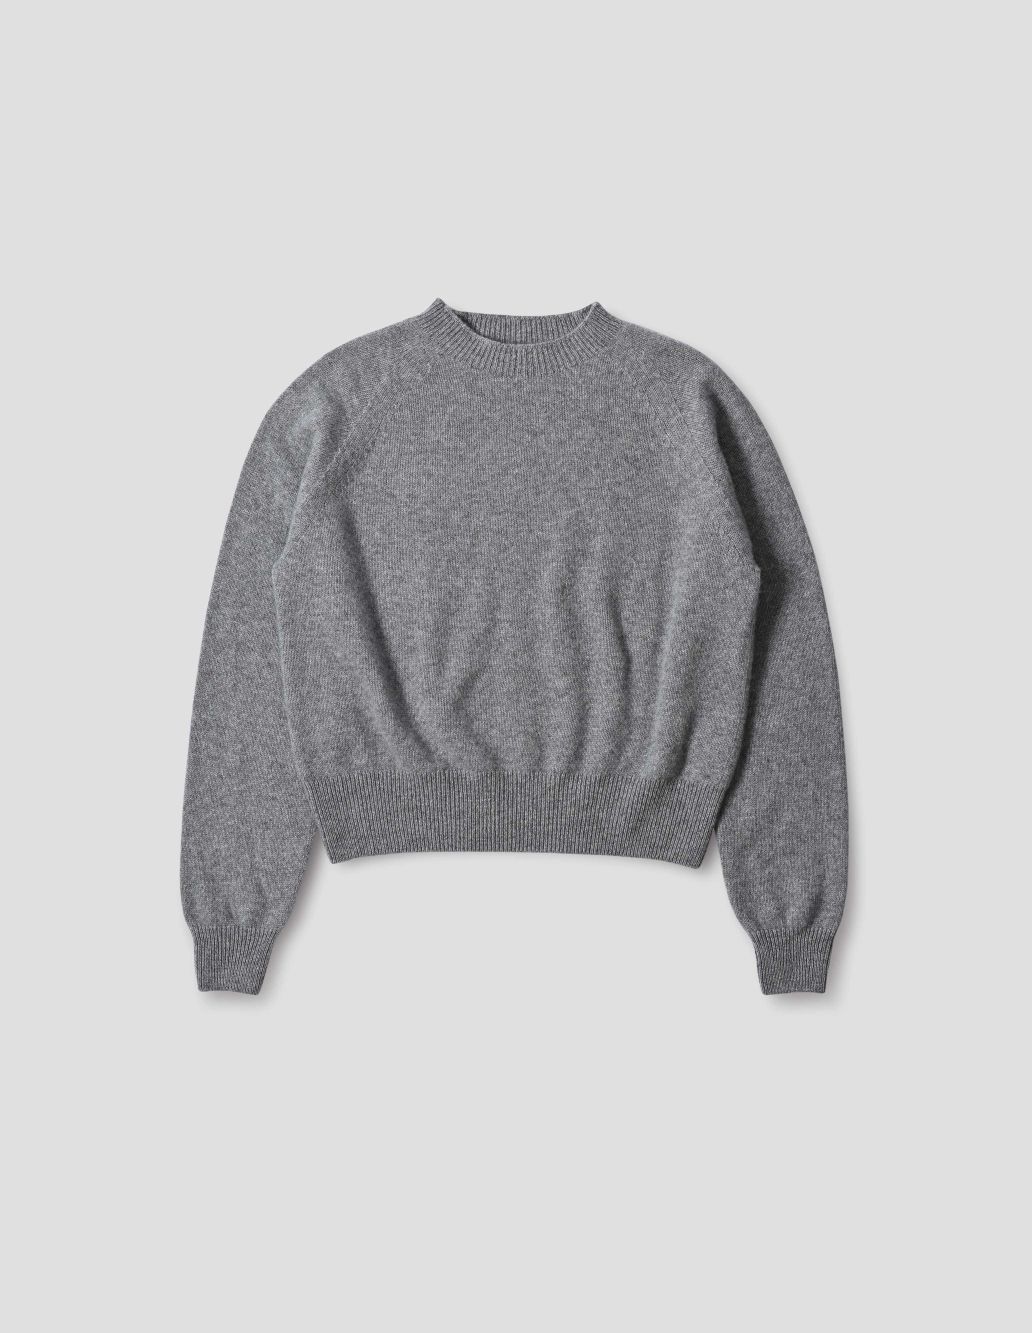 MARGARET HOWELL - Grey flannel cashmere classic crew neck